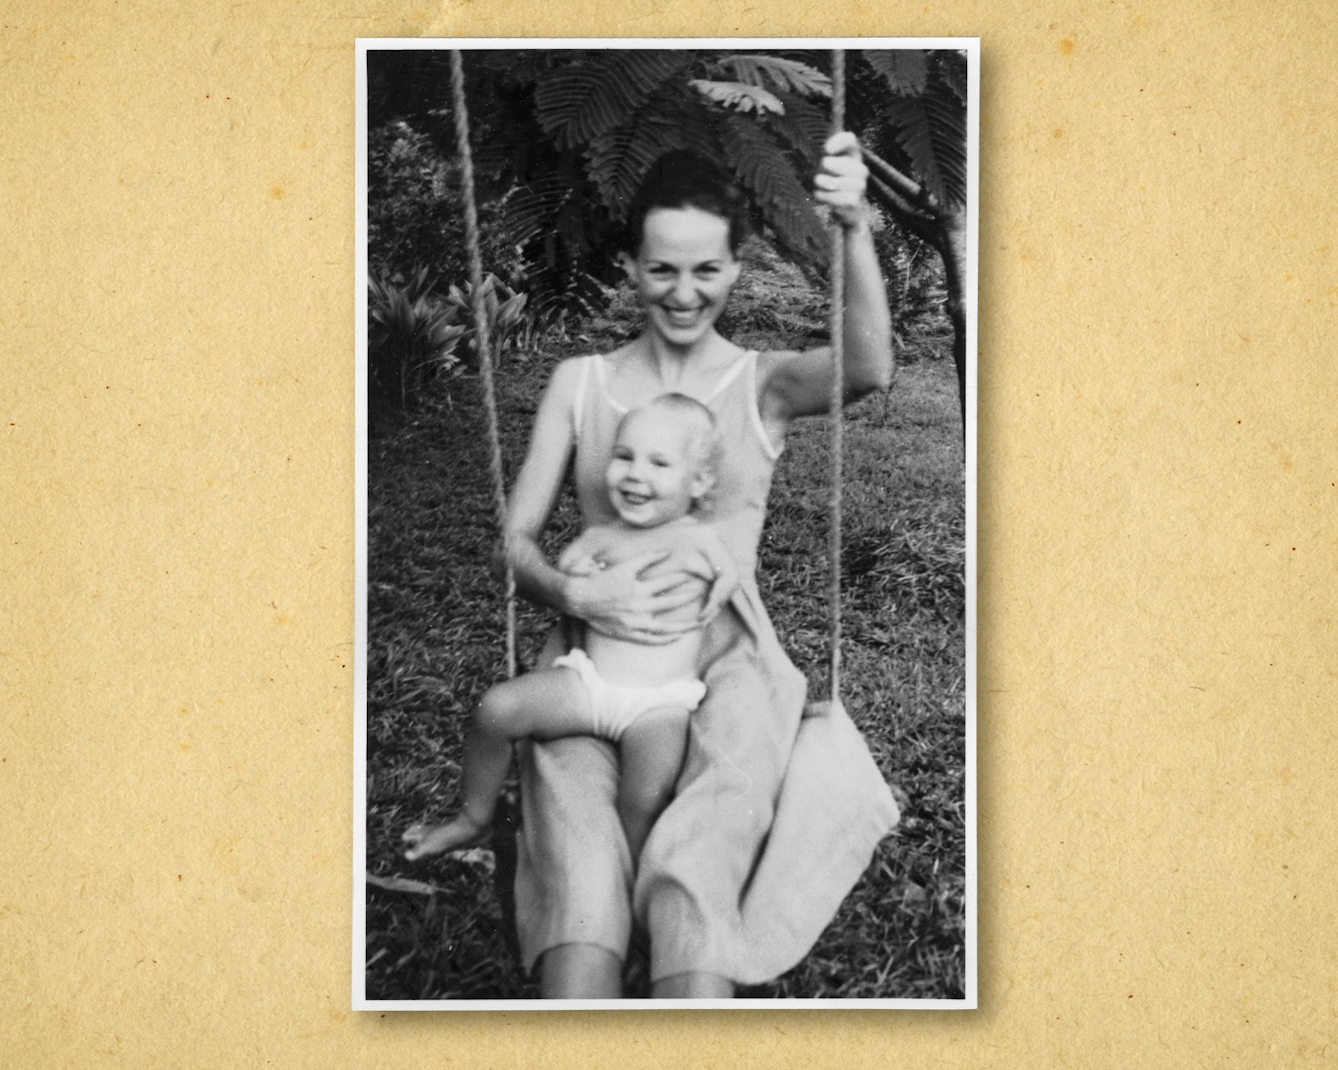 Photograph of a black and white photographic print, resting on a brown paper textured background. The print shows a woman sitting on a swing in a garden. Sitting on her lap is a young child wearing only a nappy. The woman is holding the child with her right arm and holding the swing rope with the other. Both are smiling happily to the camera.